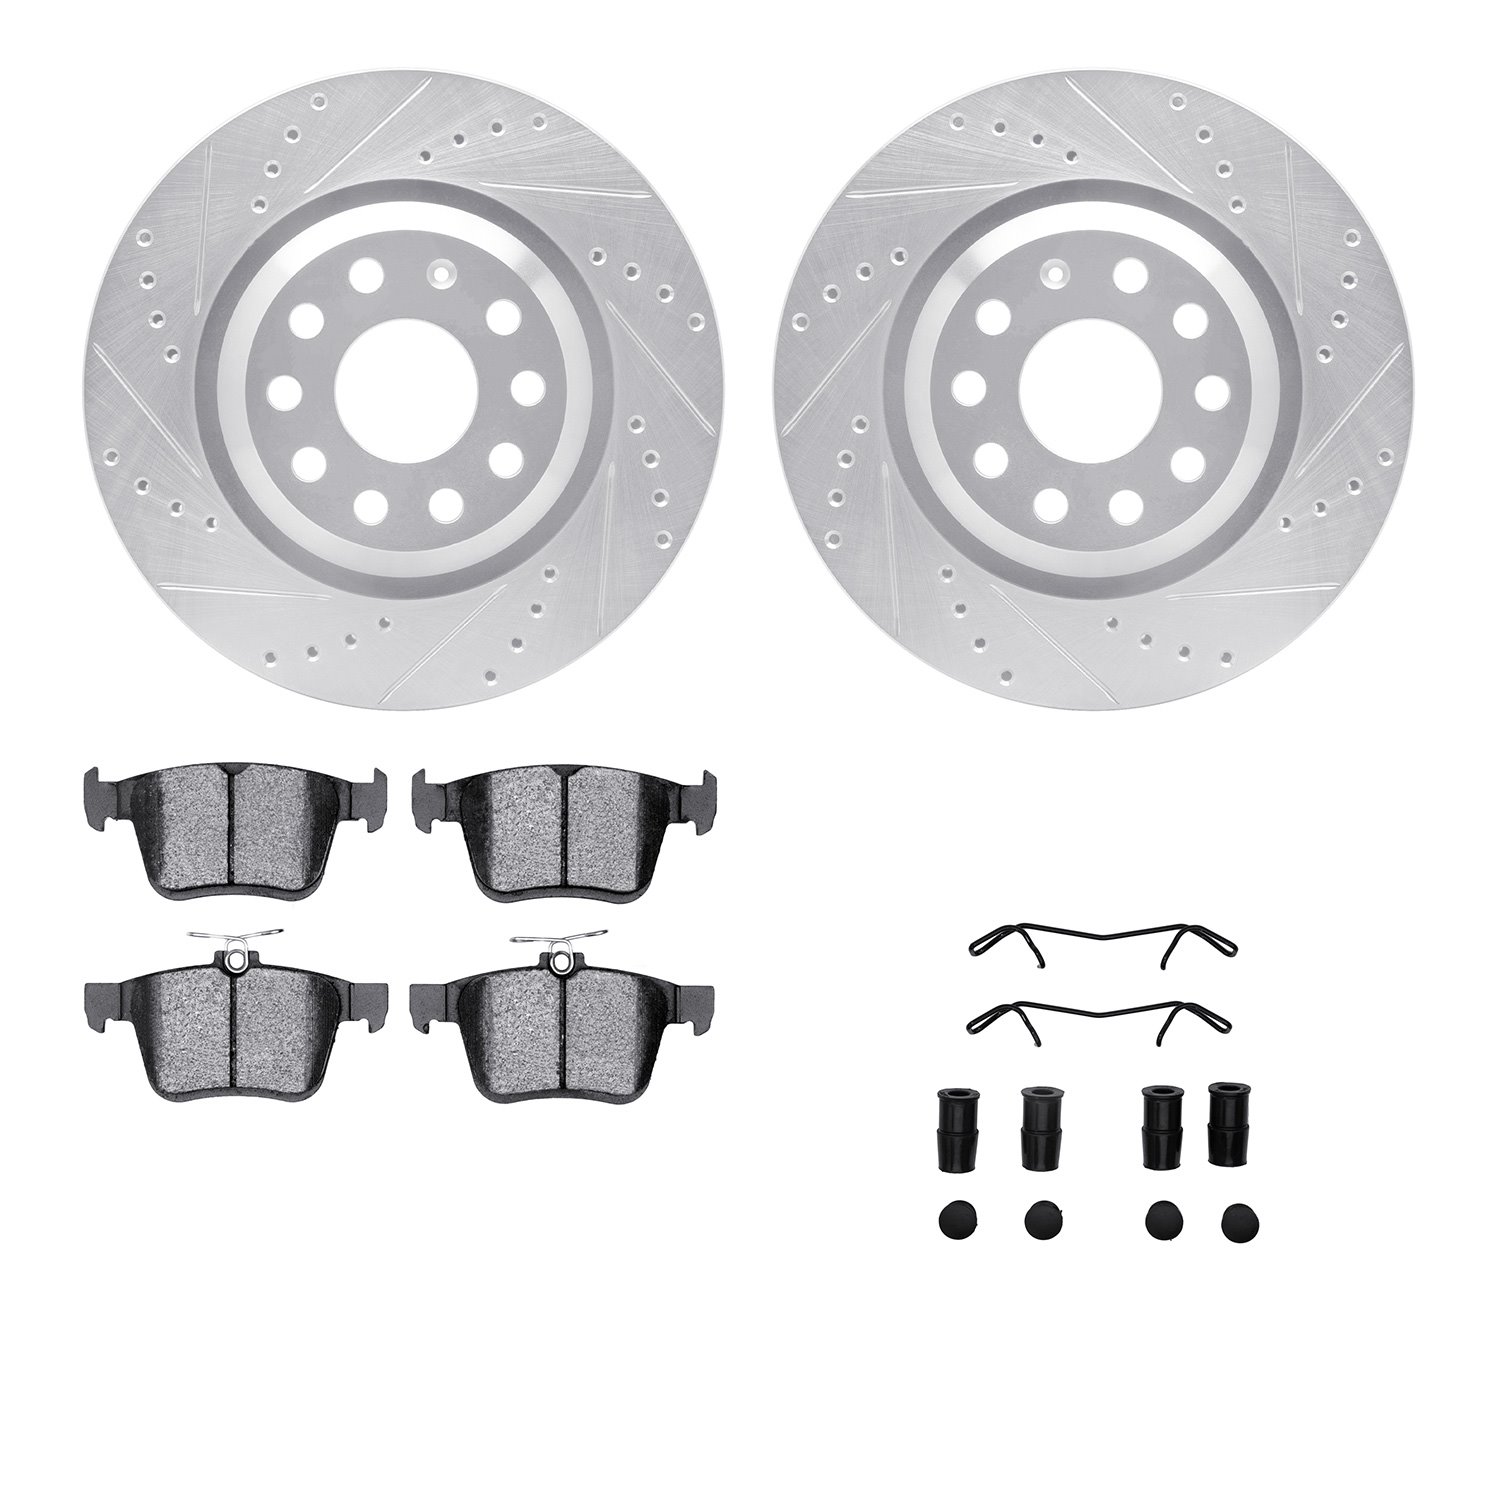 7512-74093 Drilled/Slotted Brake Rotors w/5000 Advanced Brake Pads Kit & Hardware [Silver], Fits Select Audi/Volkswagen, Positio